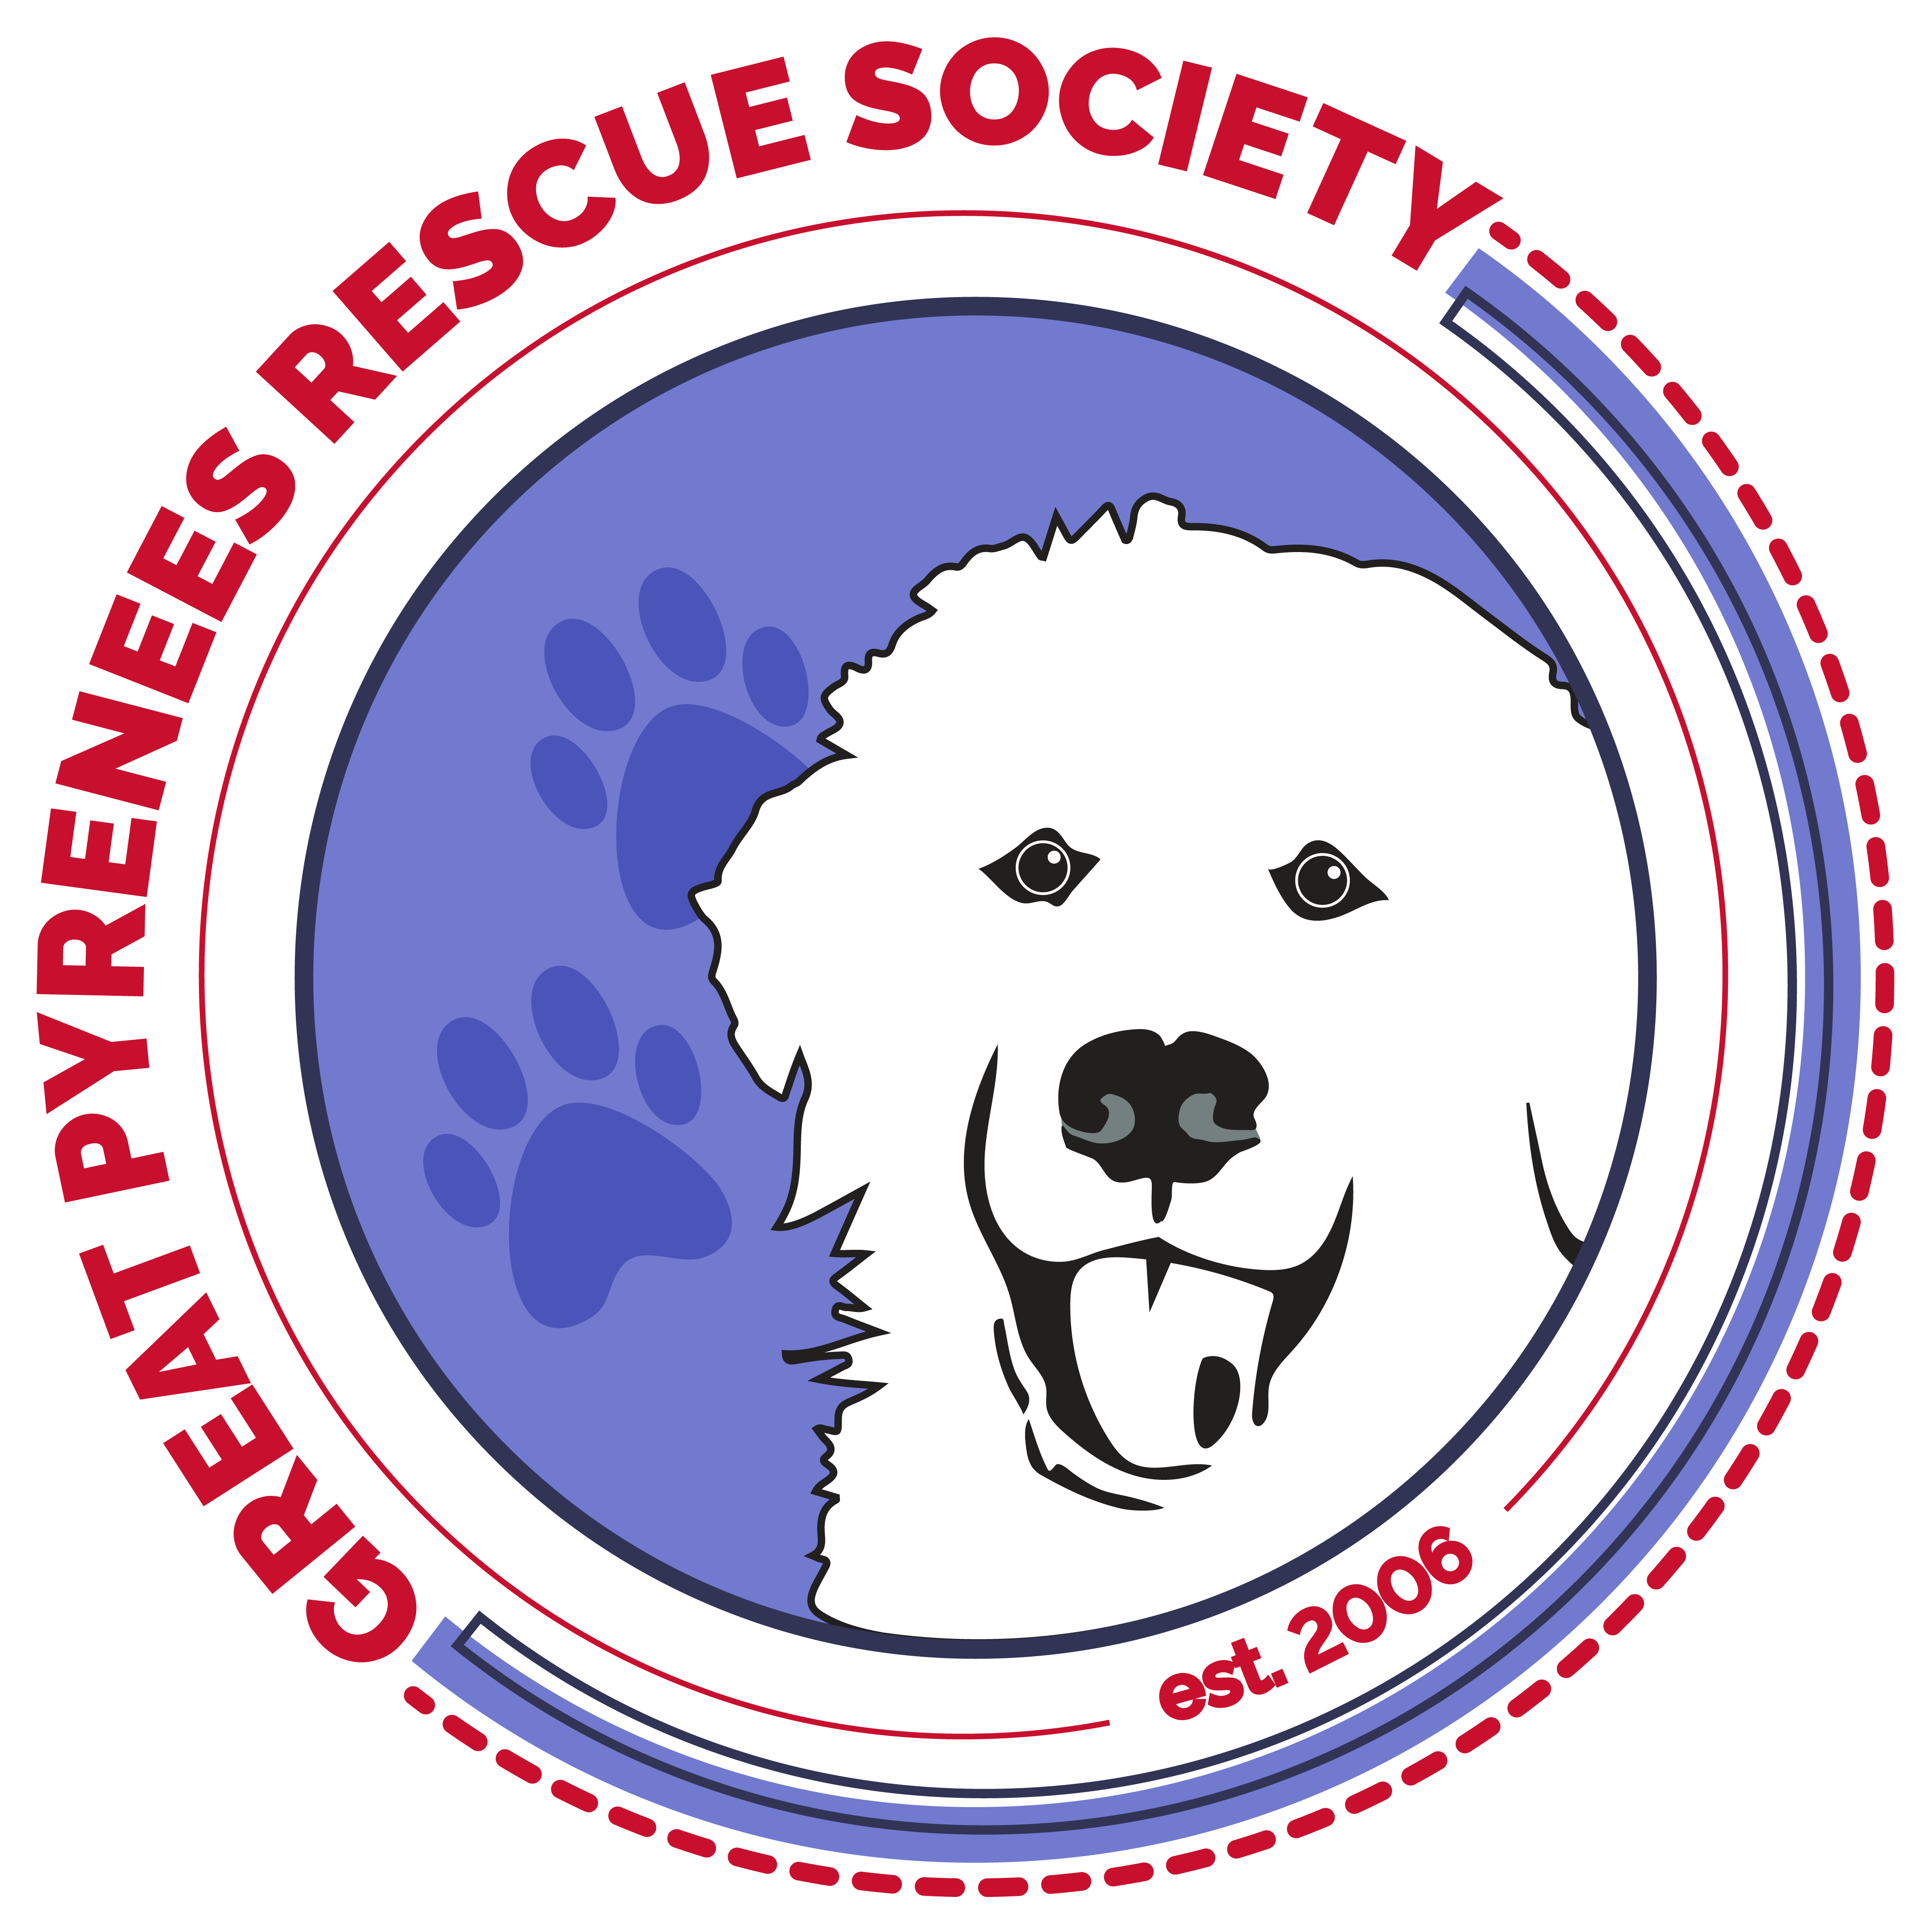 Great Pyrenees Rescue Society